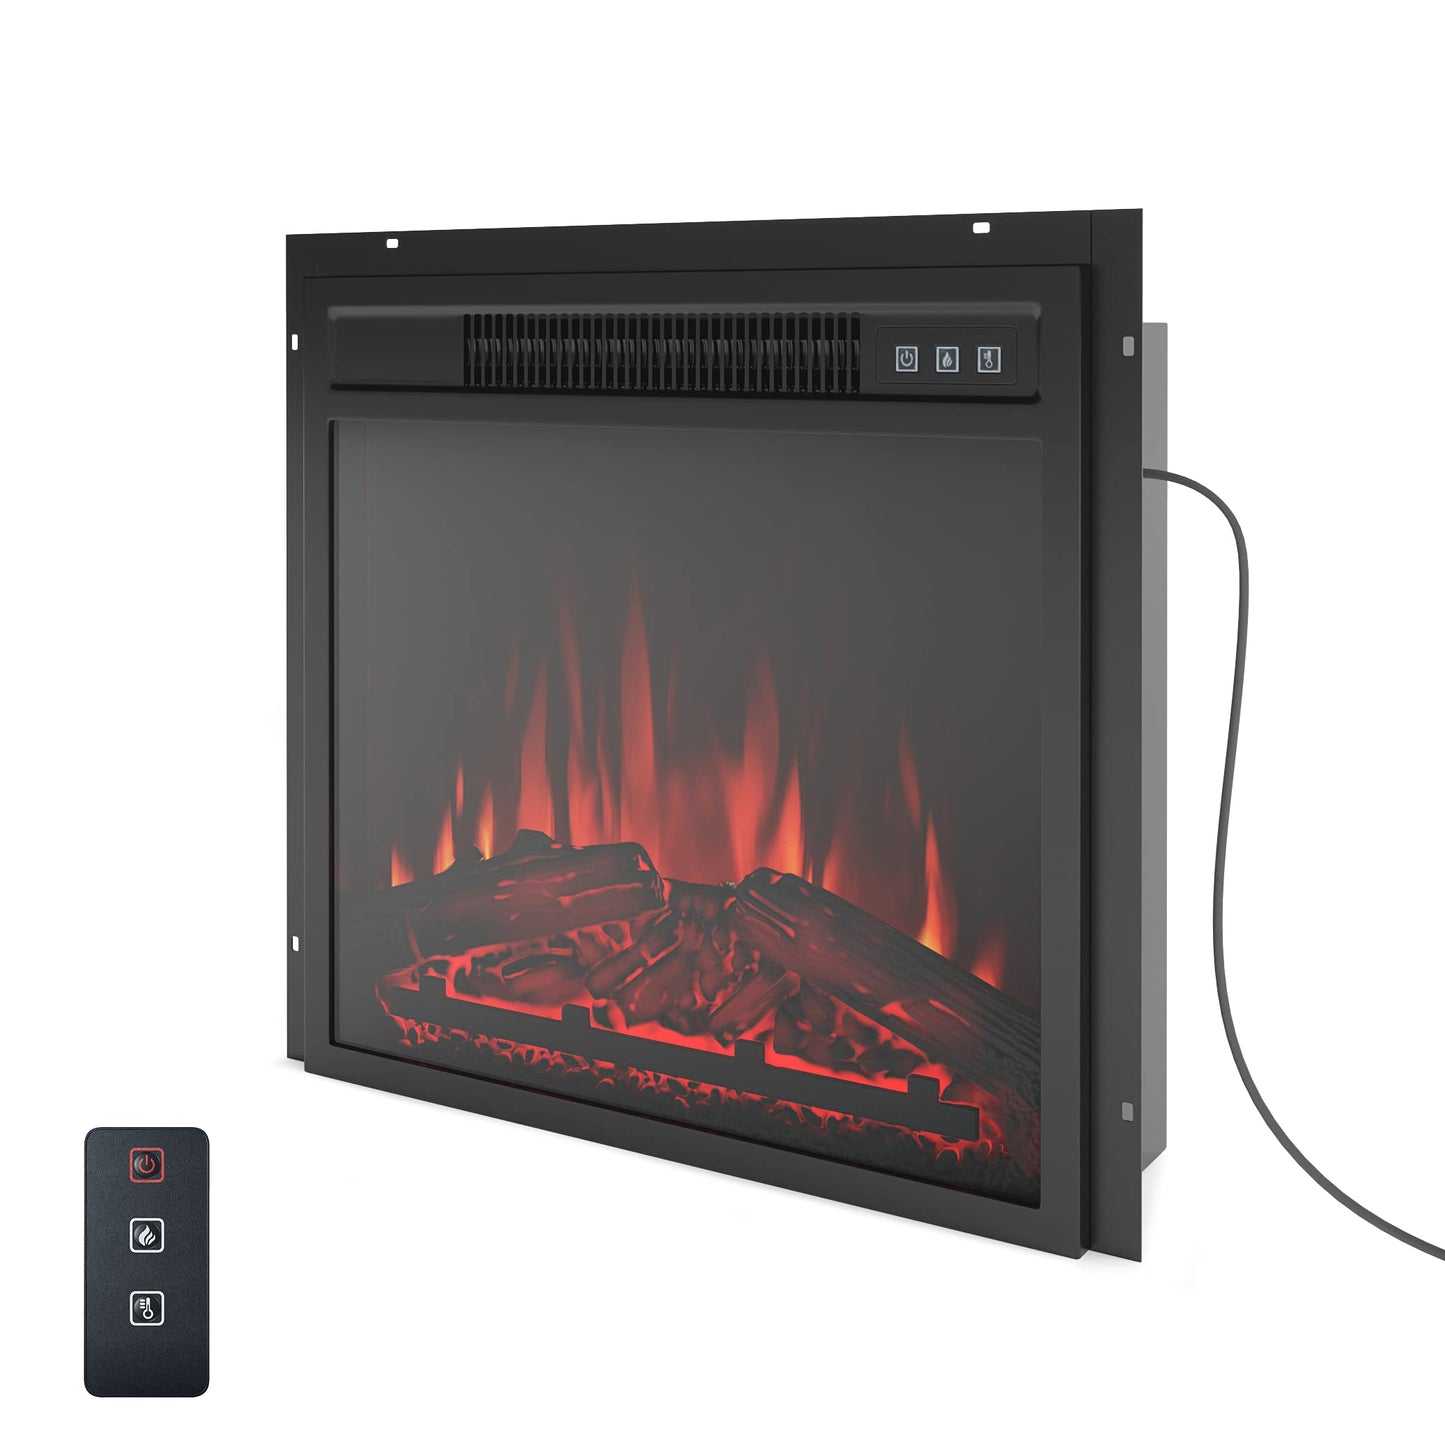 ZTOZZ 18 inch Electric Fireplace LED - Fireplace Heater Stove Insert with overheating Protection 1400W - Black Color - Home Decor Gifts and More